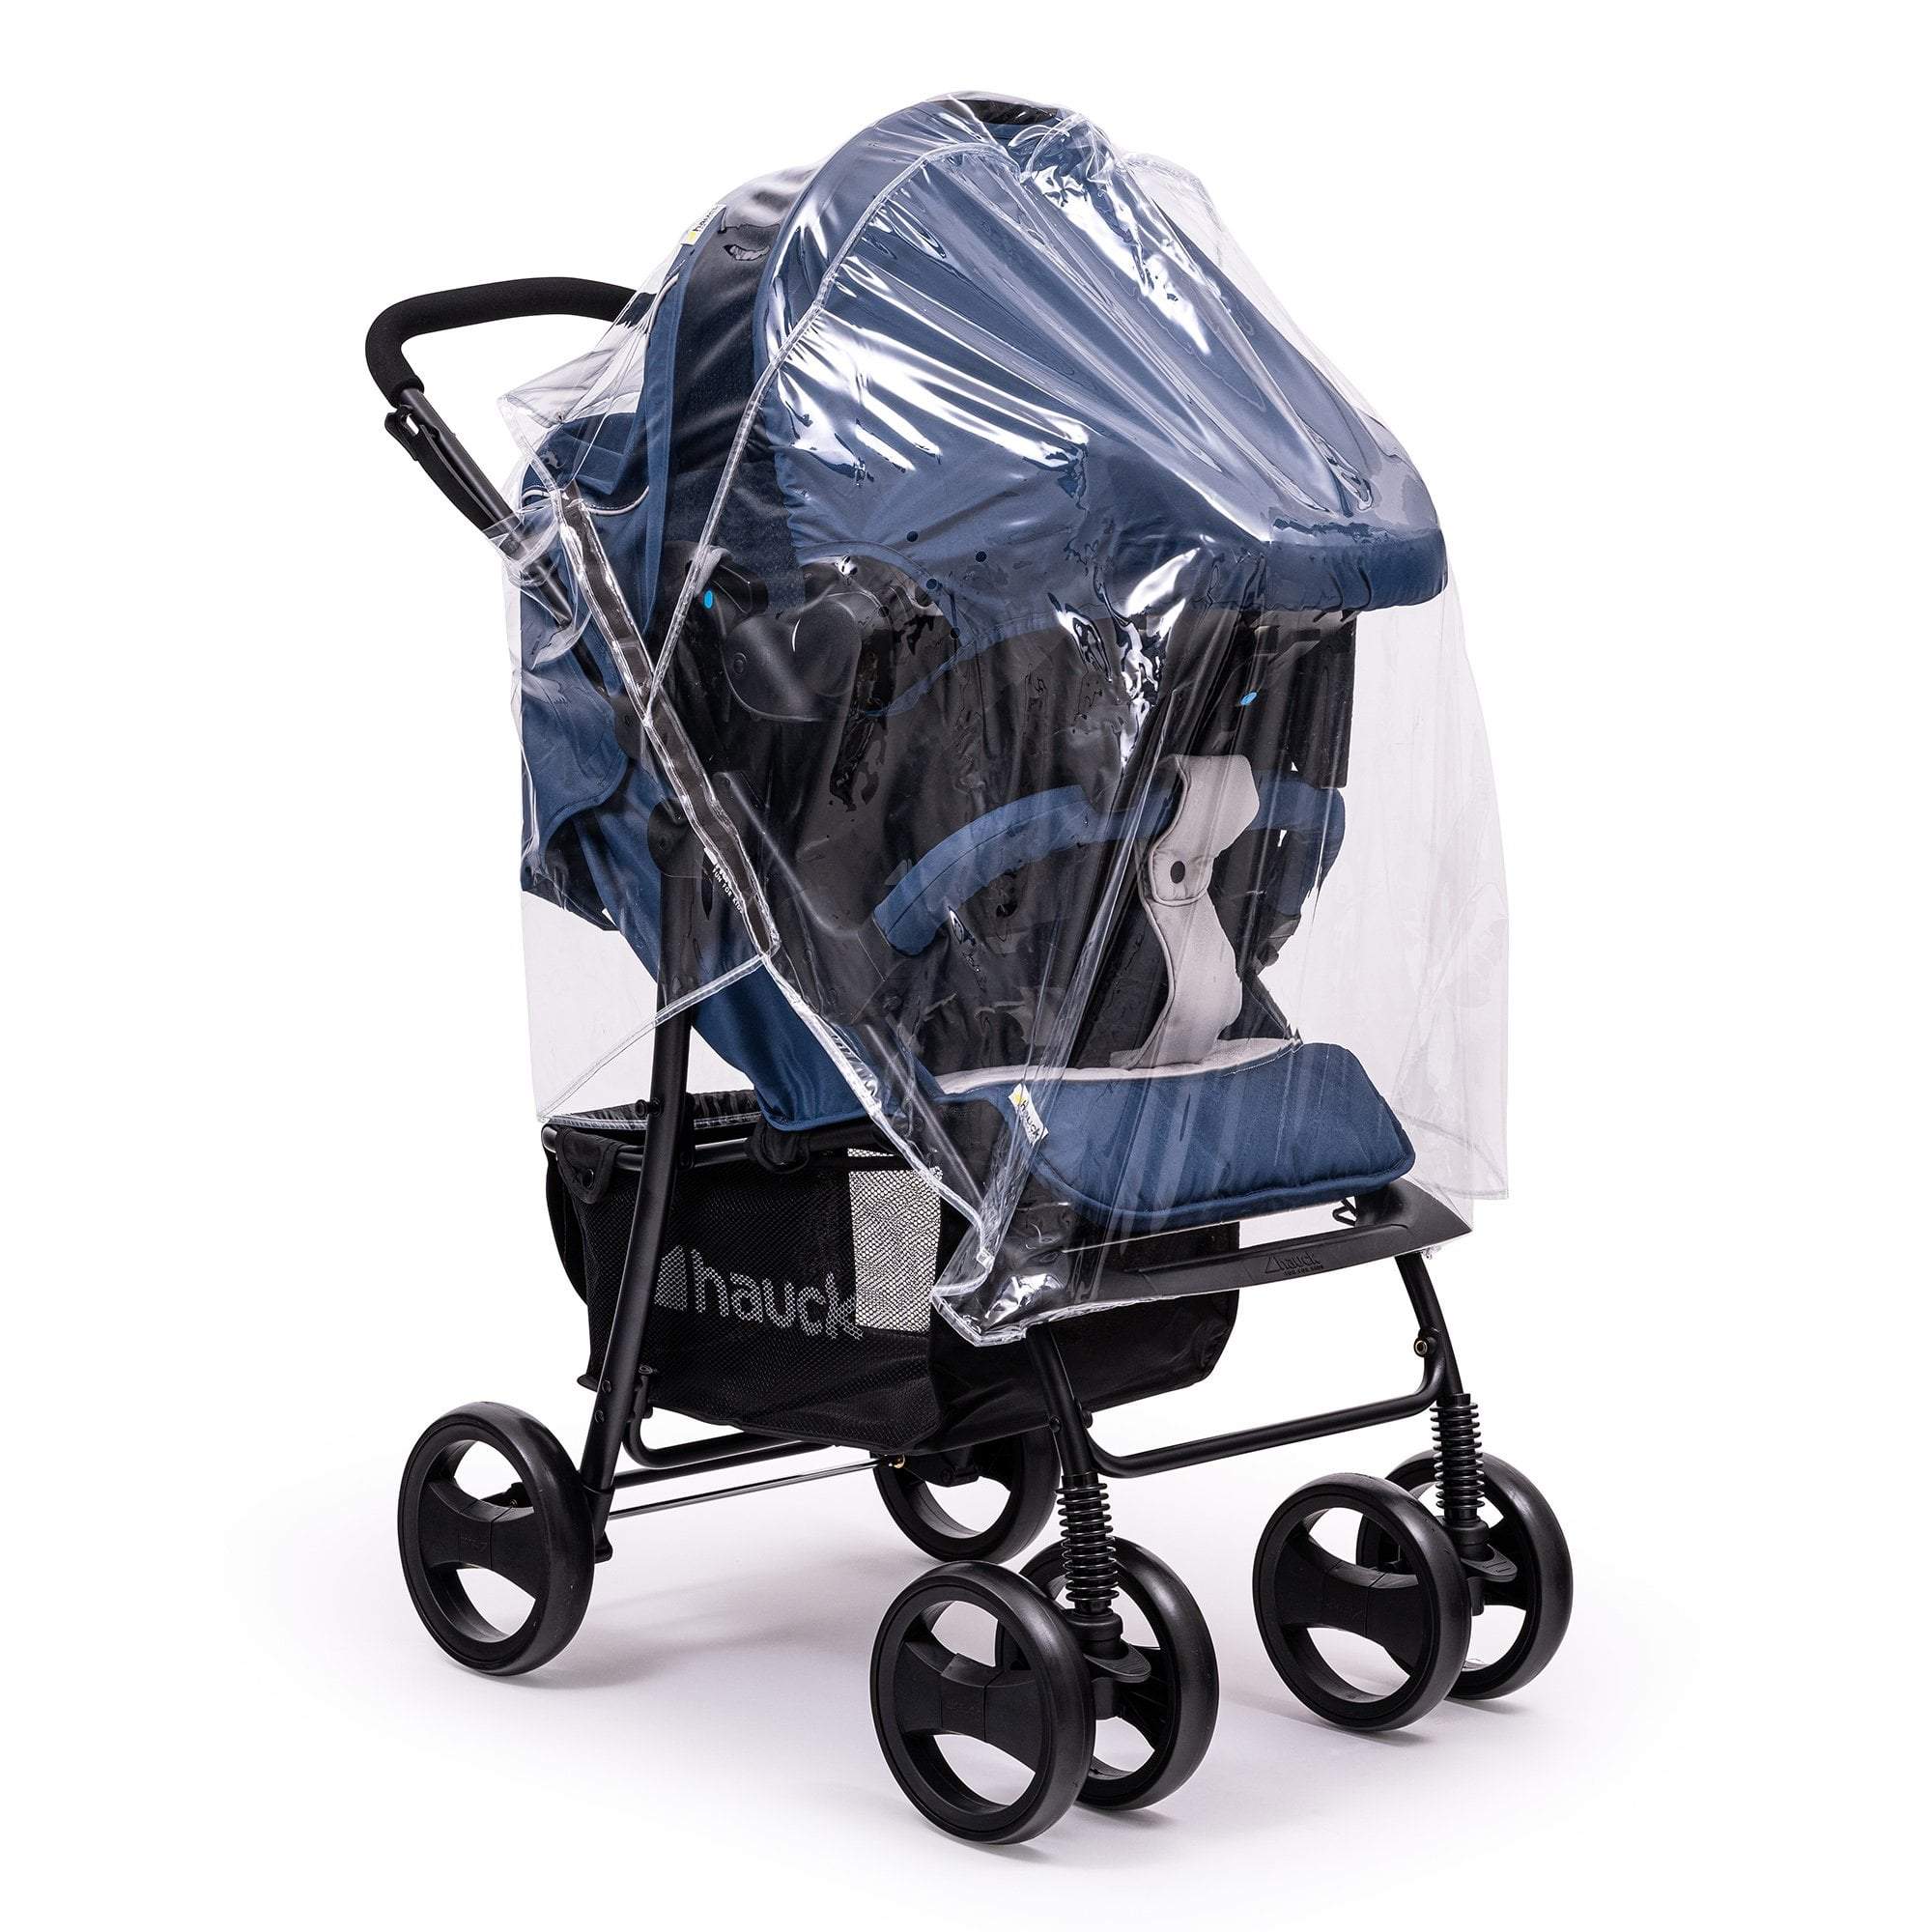 Travel System Raincover Compatible with TFK - Fits All Models - For Your Little One